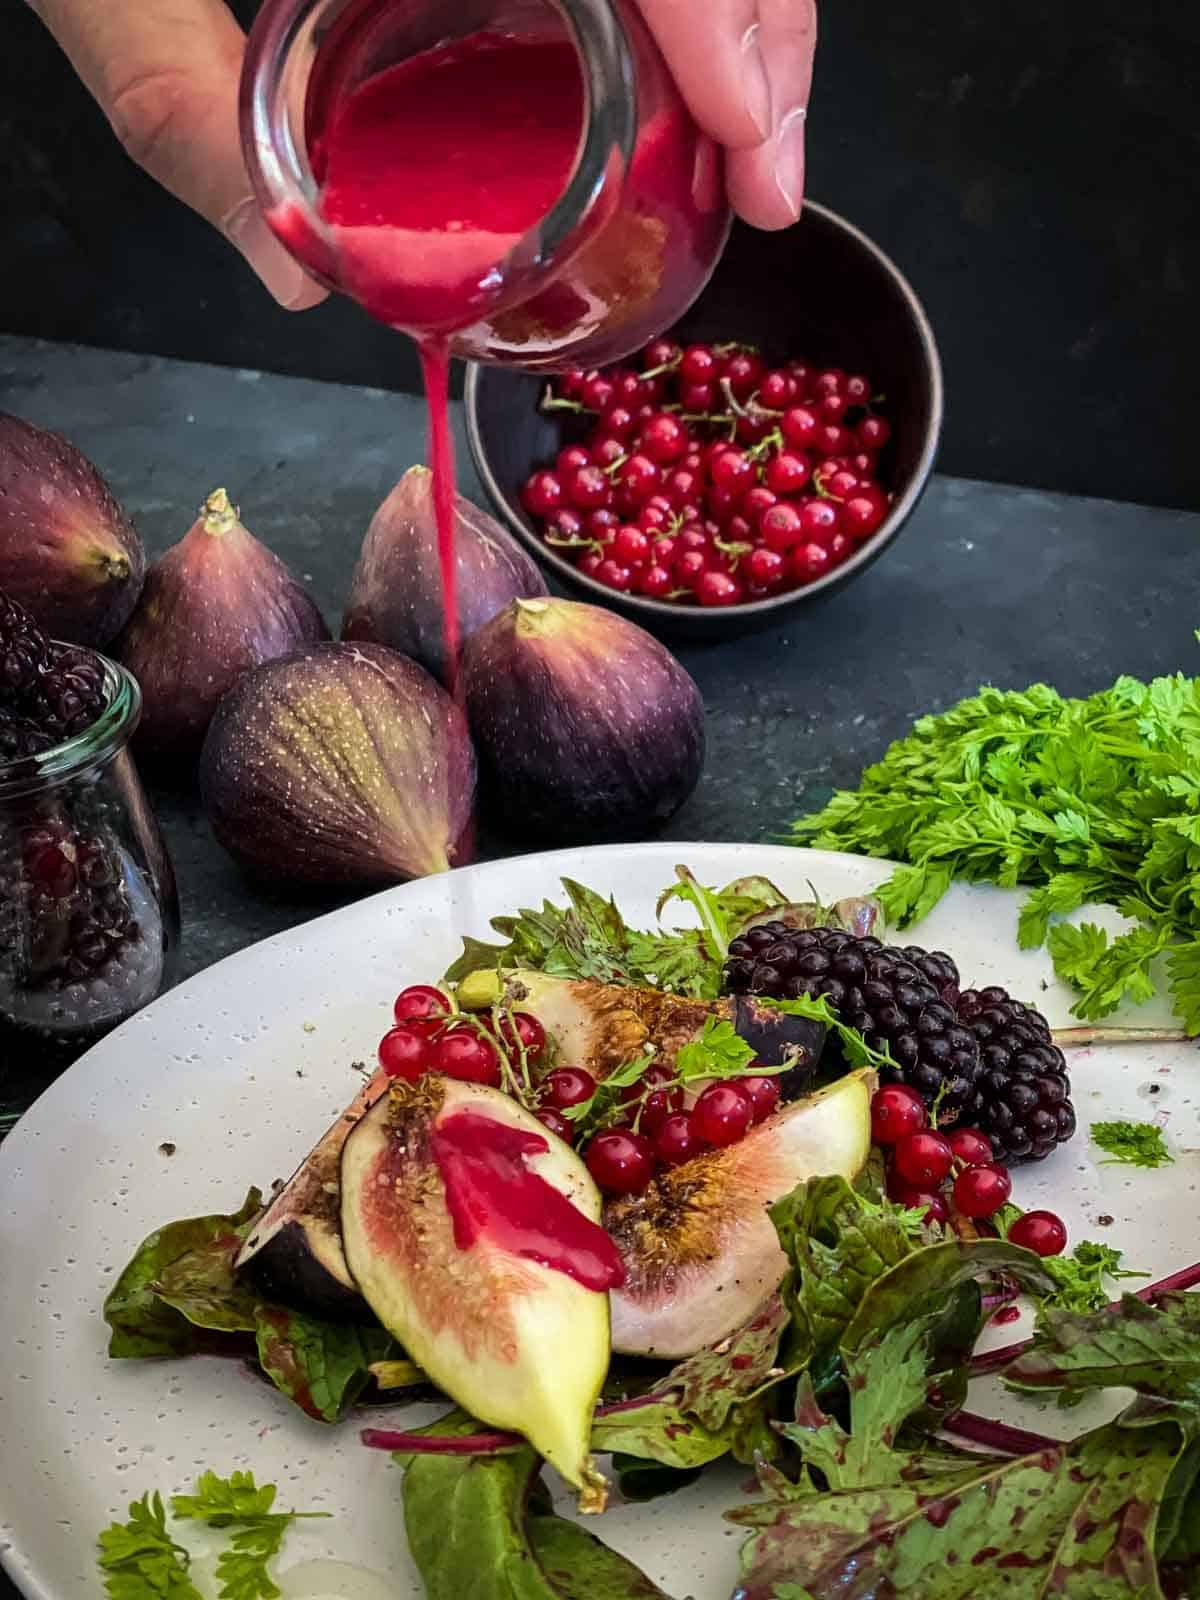 Pouring blackberry salad dressing over red currant salad